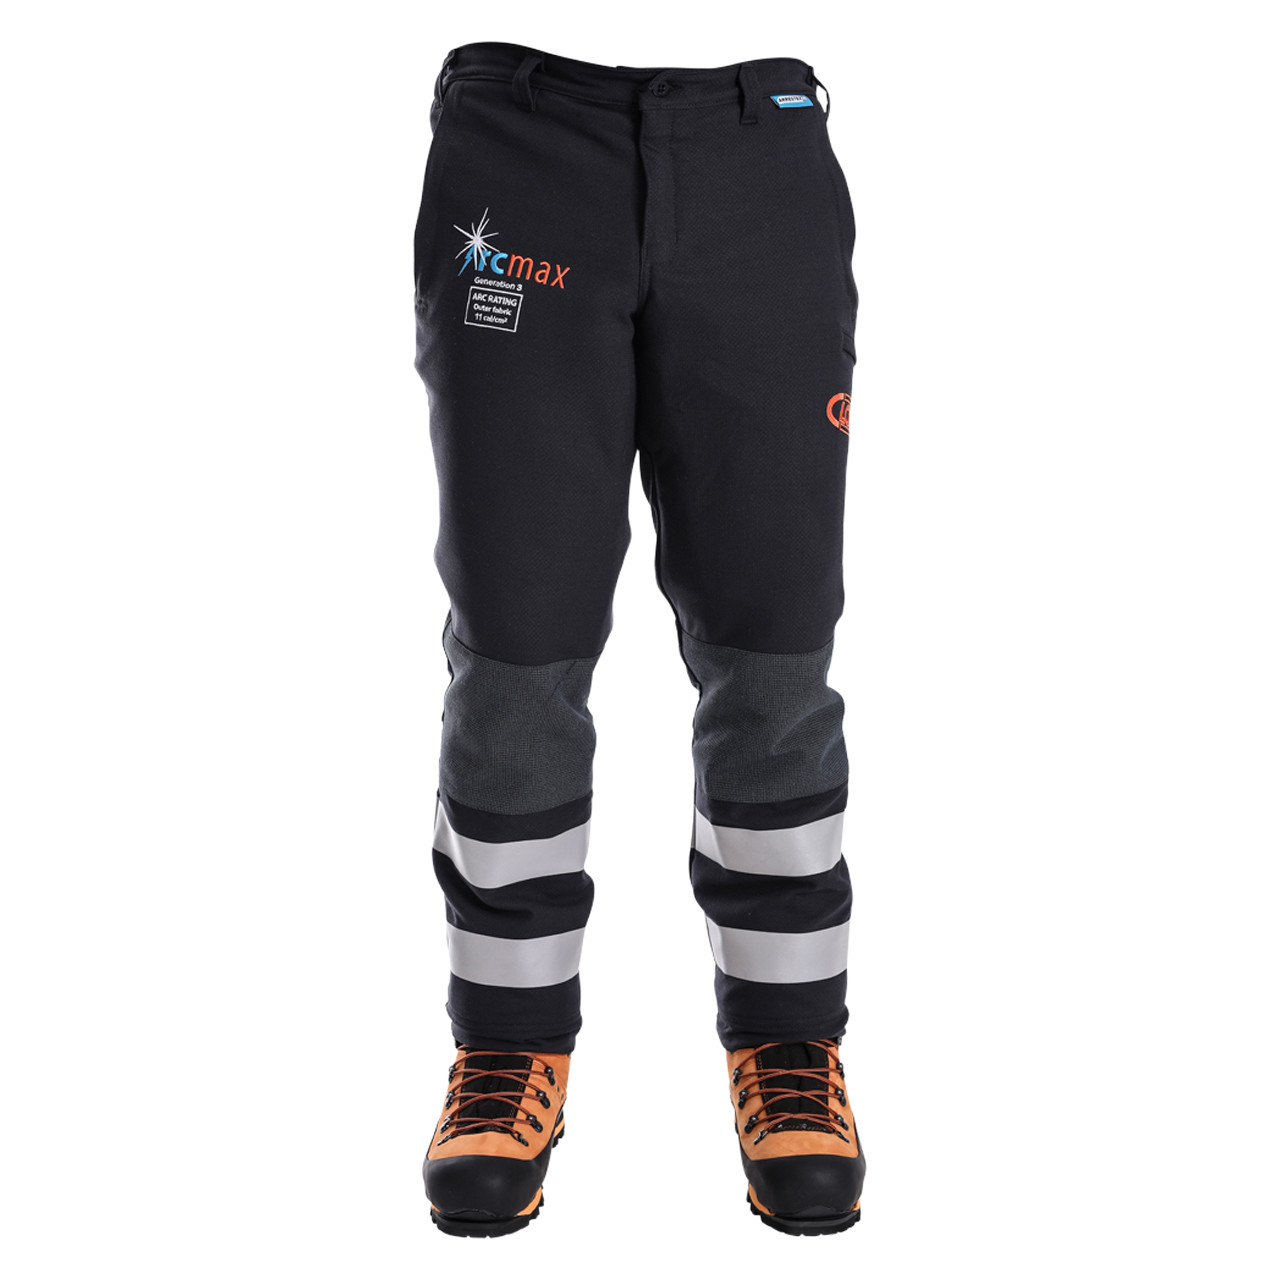 STIHL ADVANCE XFLEX Chainsaw Trousers Lightweight Breathable and  Protective